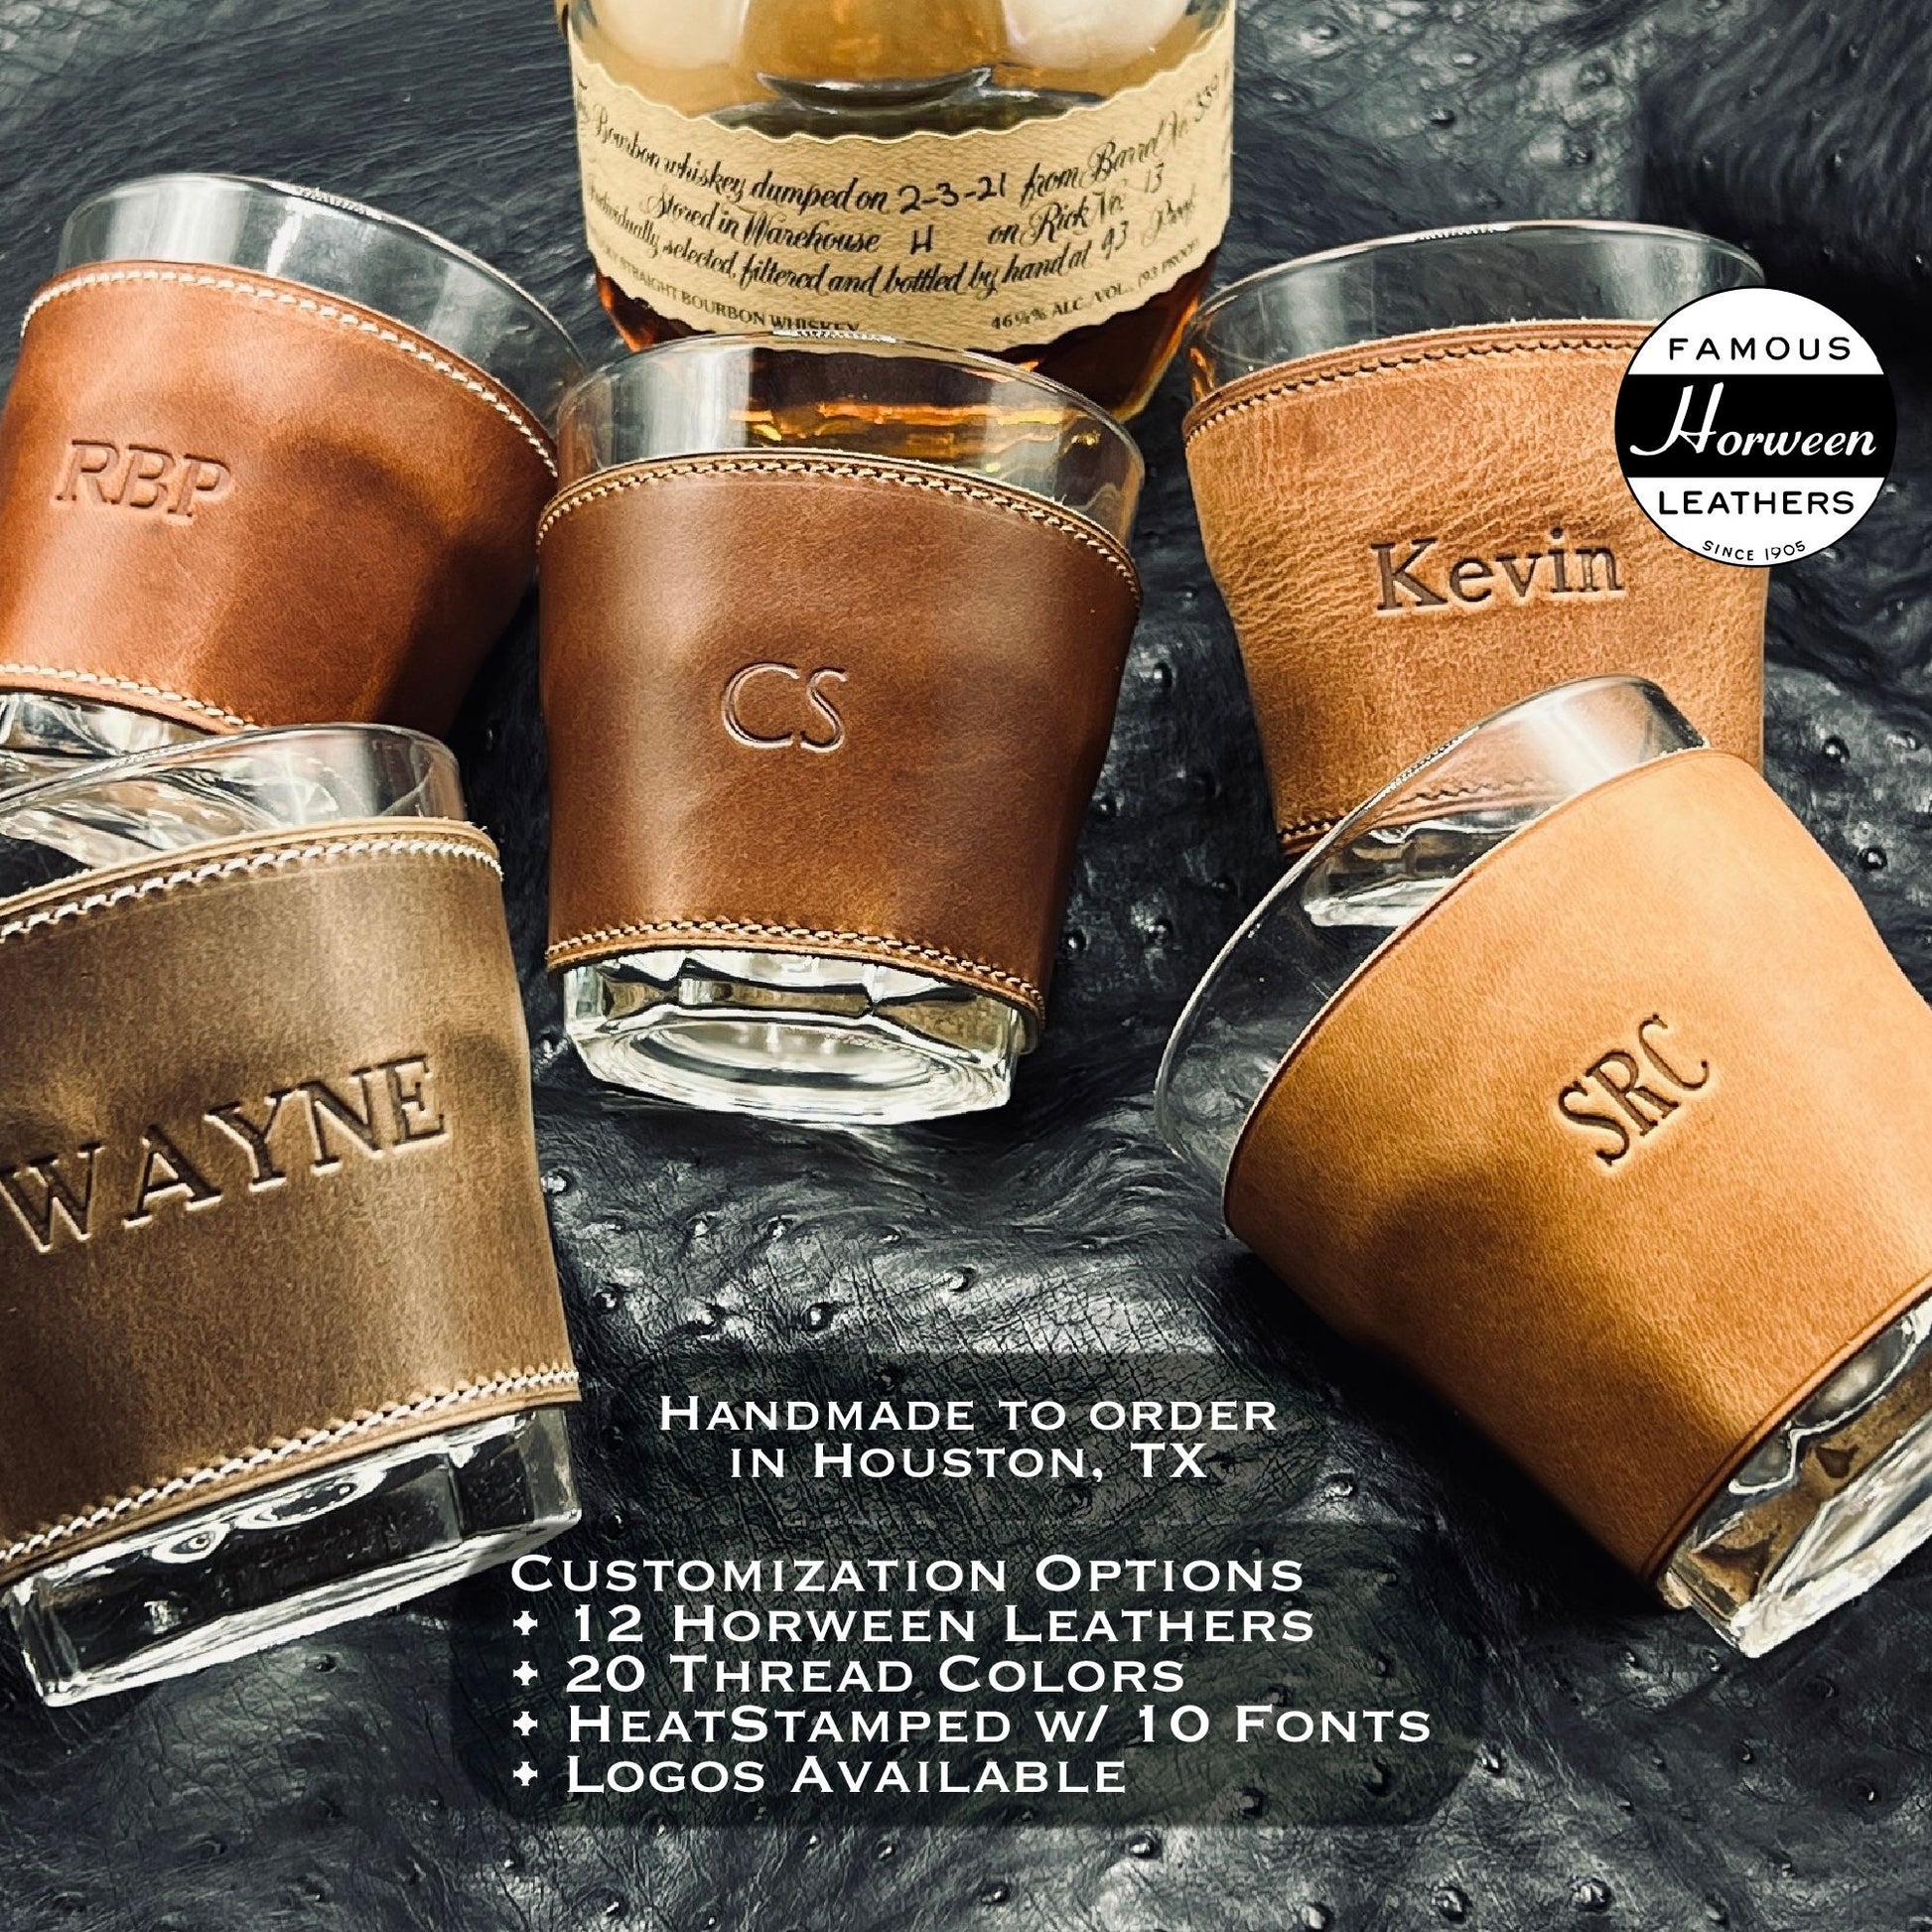 Personalized Whiskey Glasses in Horween Leather | Handmade to Order | Custom Leather and Pen in Houston, TX.  Best Groomsmen Gifts and Wedding Favors